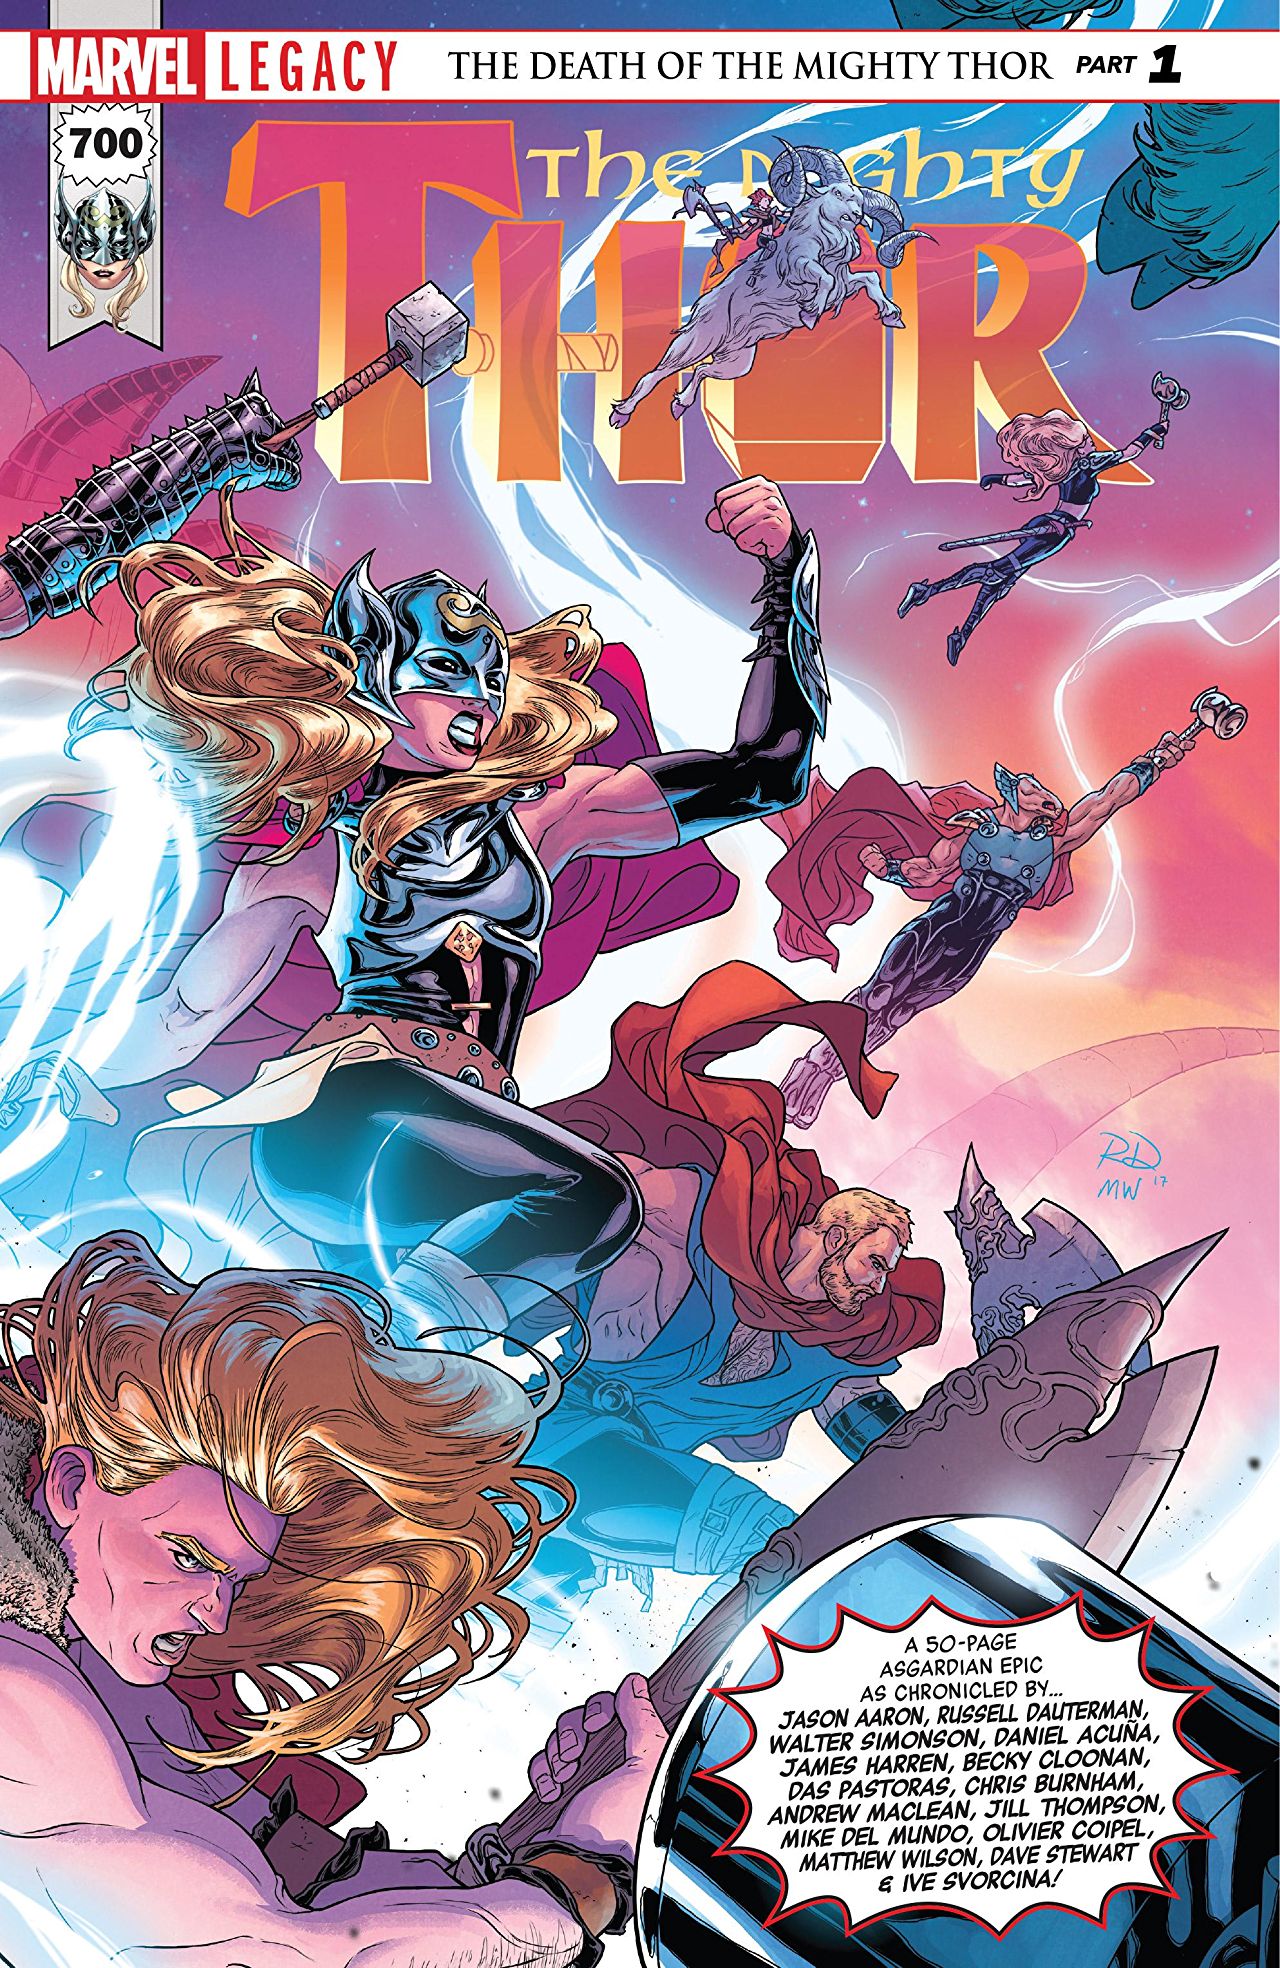 Marvel Preview: The Mighty Thor #700